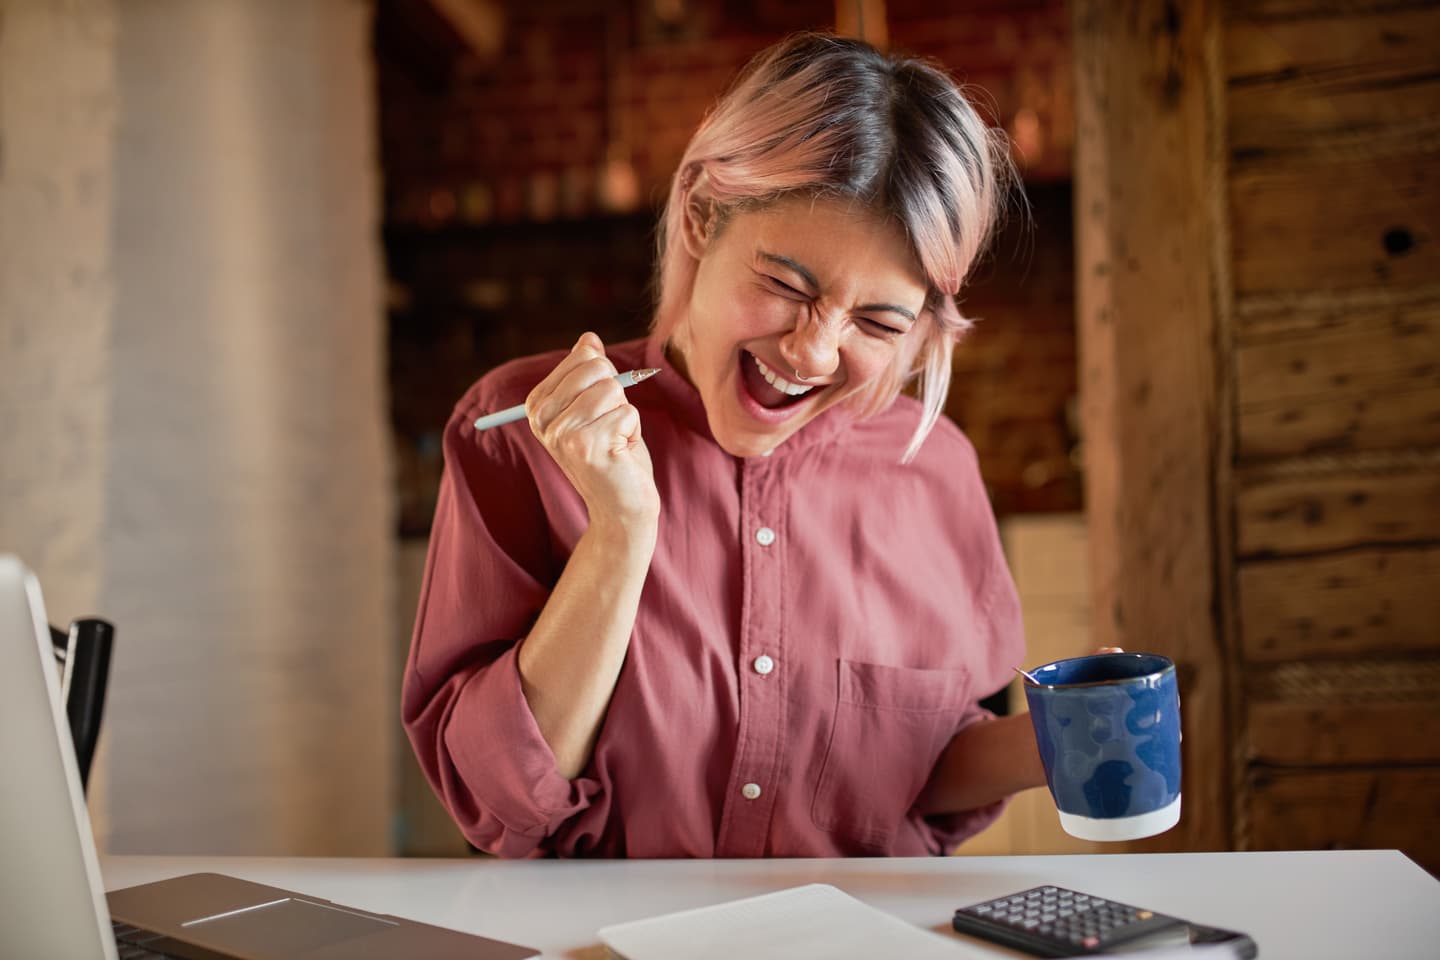 Woman excited over calculation